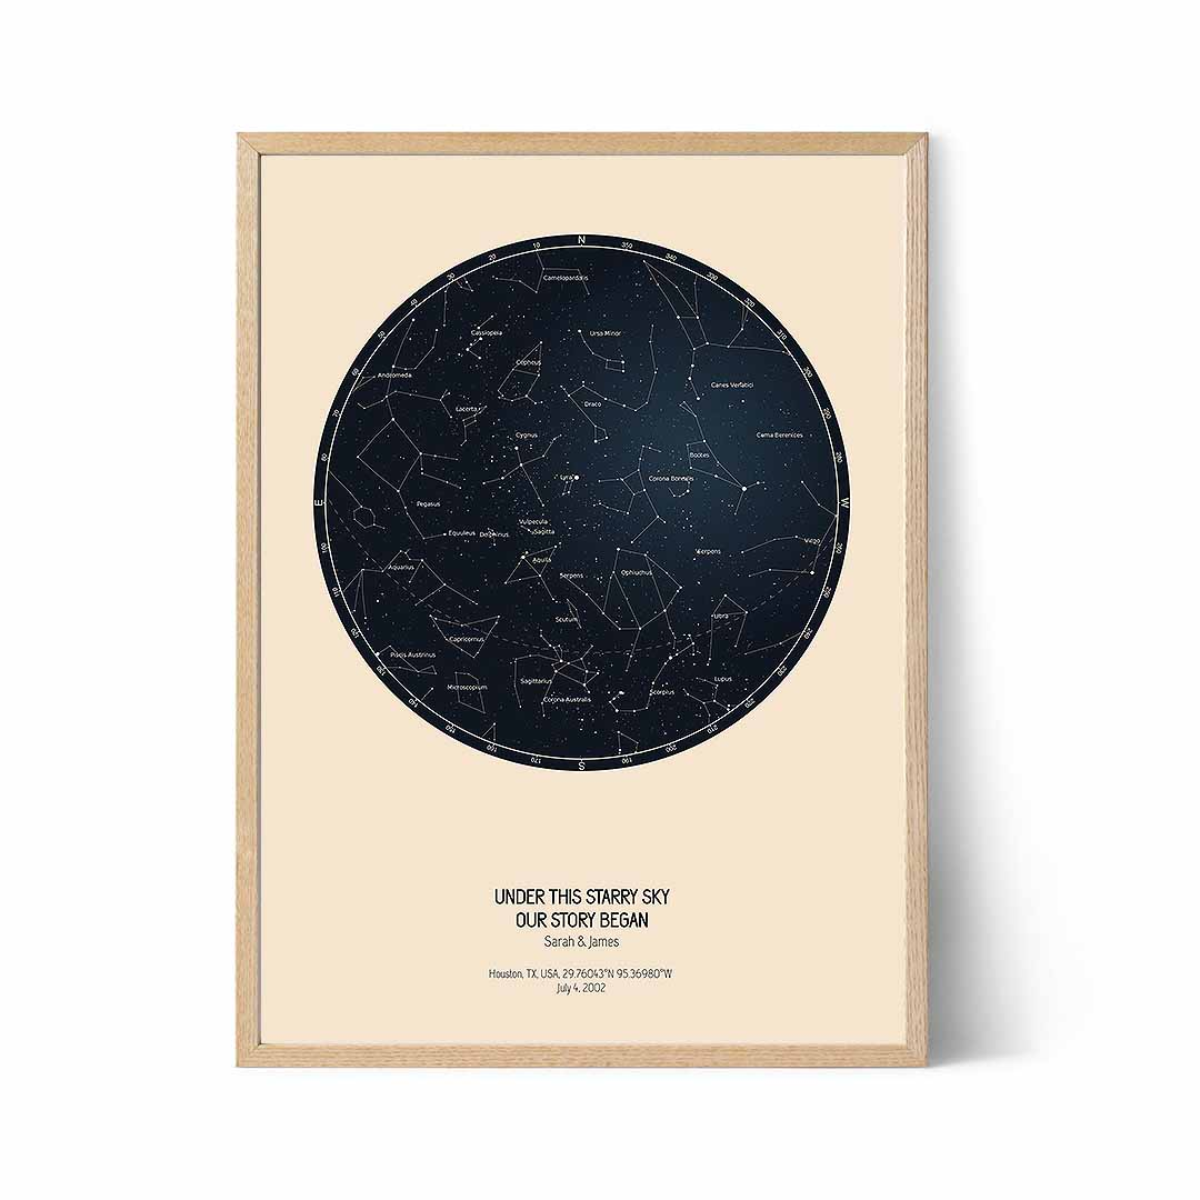 27. Illuminate Your Love Story with a Personalized Constellation Map - The Perfect Anniversary Gift